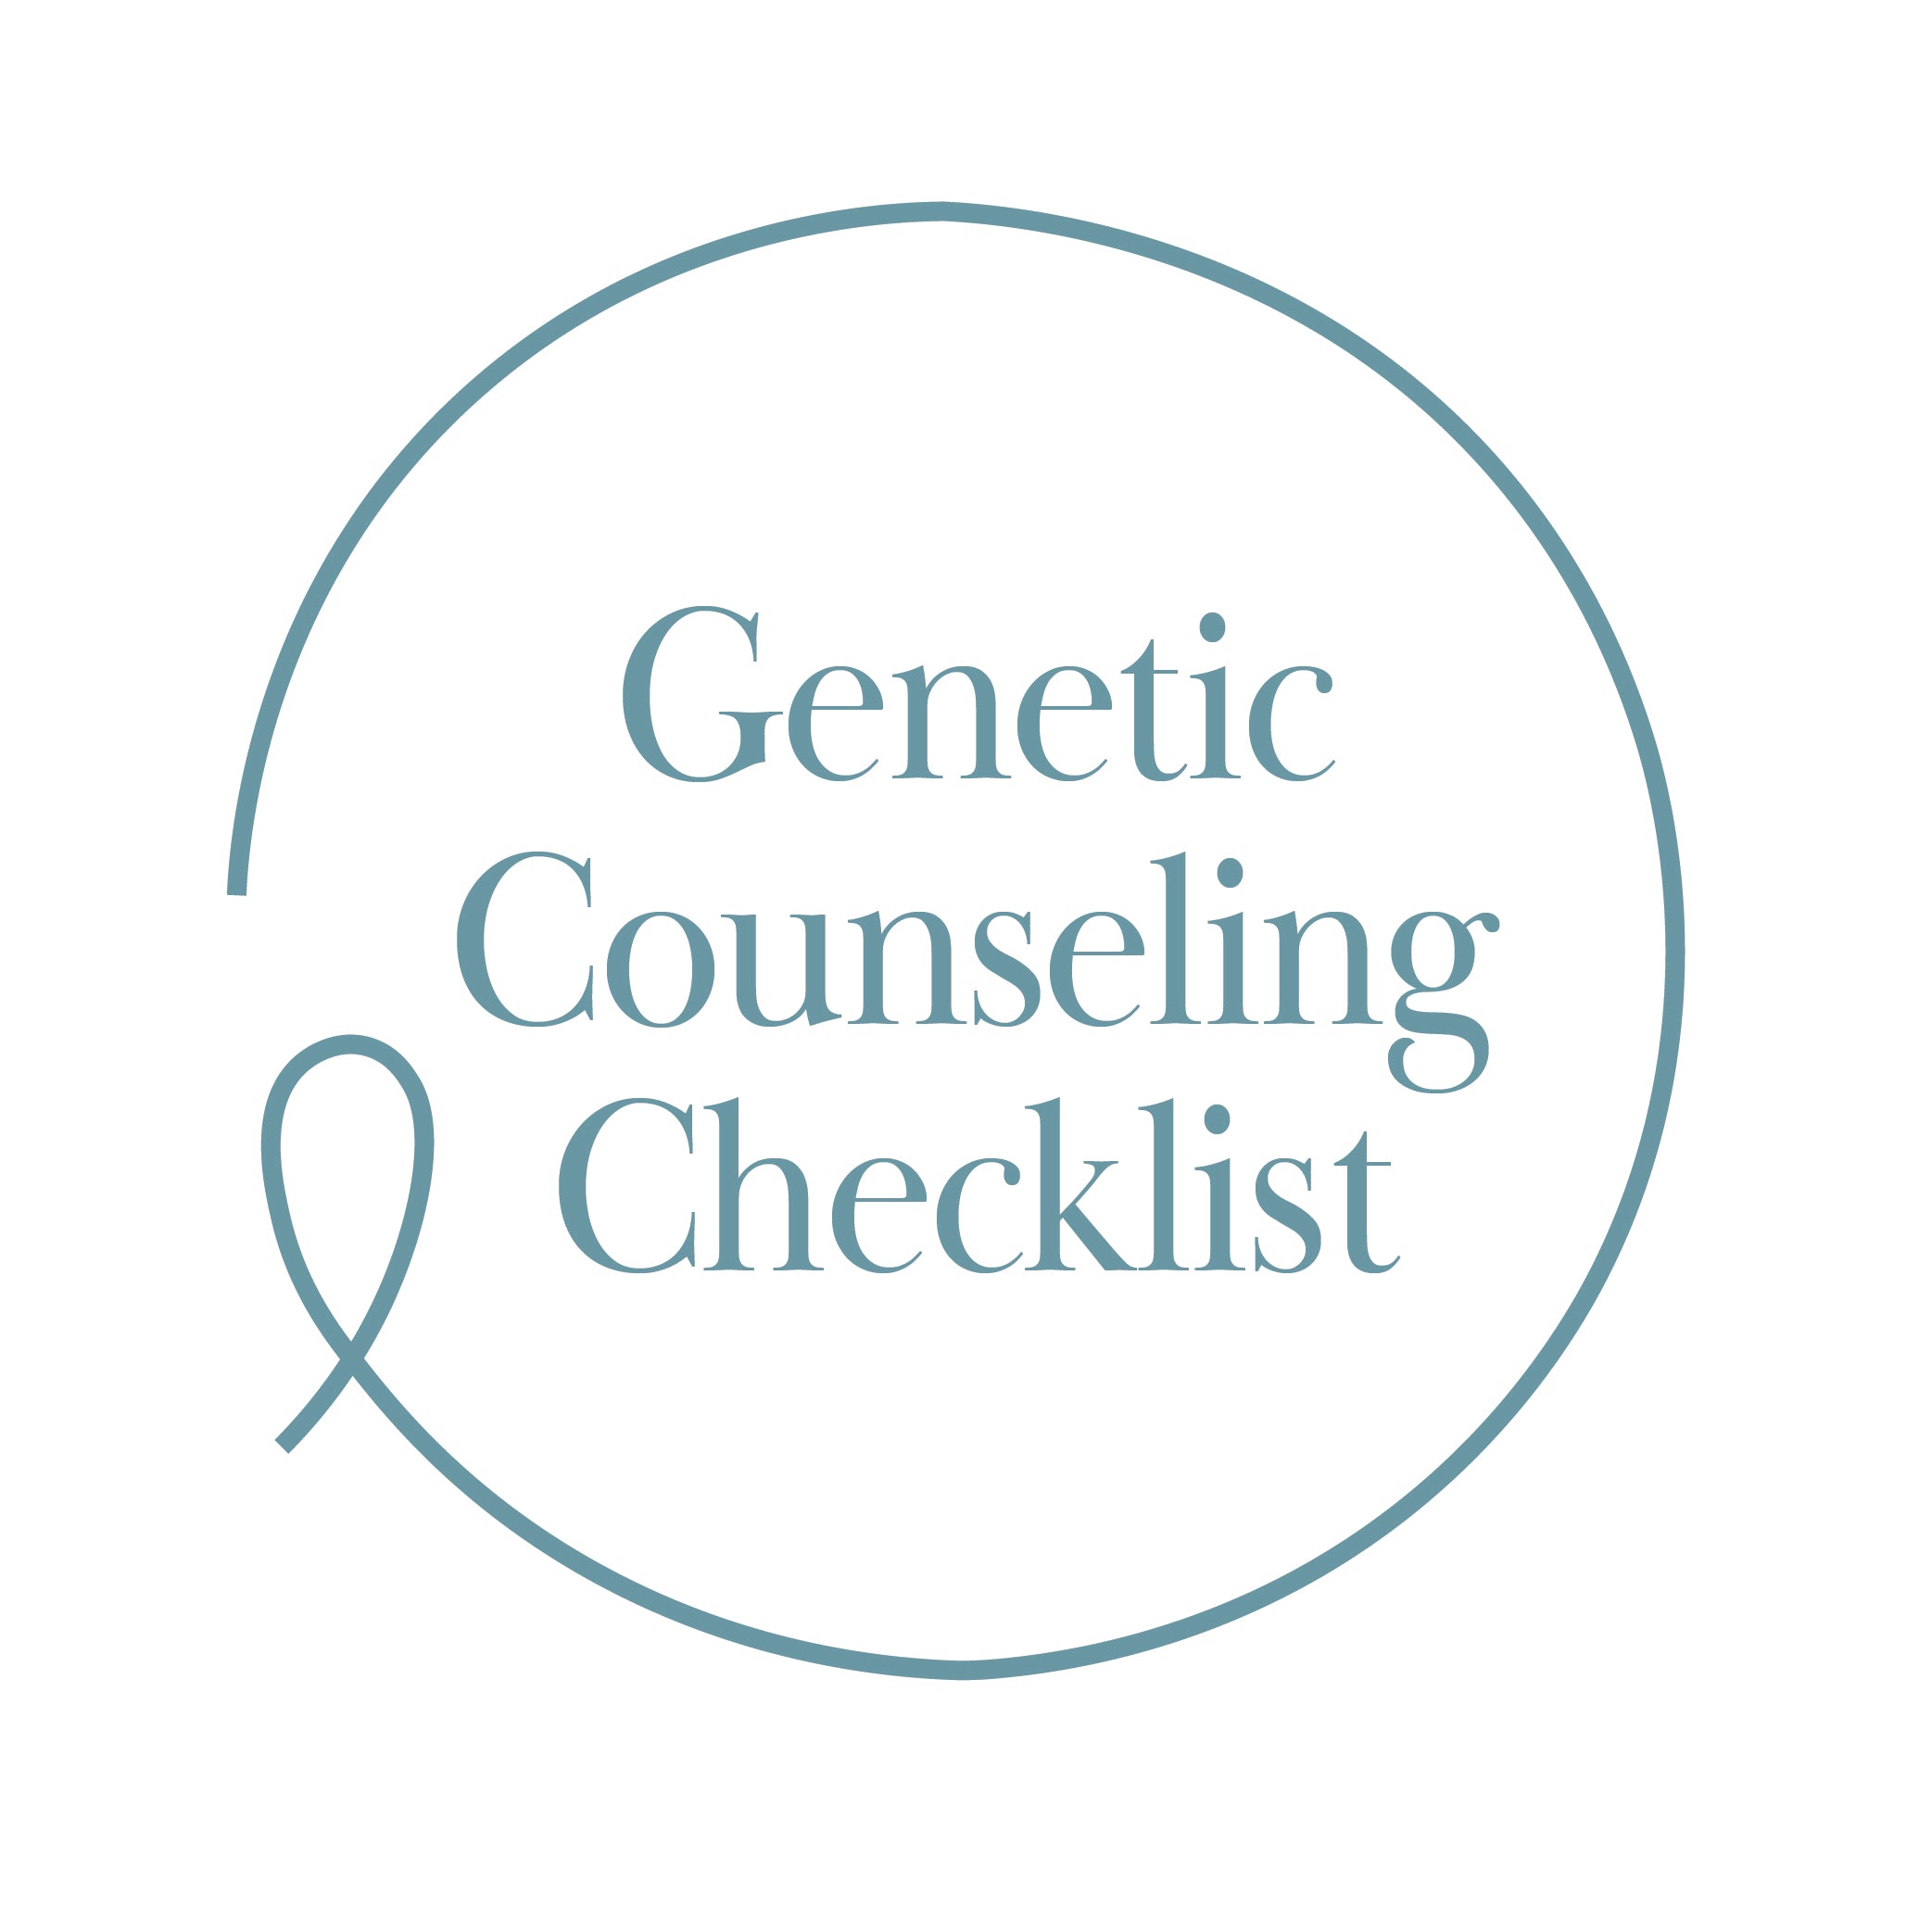 Genetic Counseling Checklist